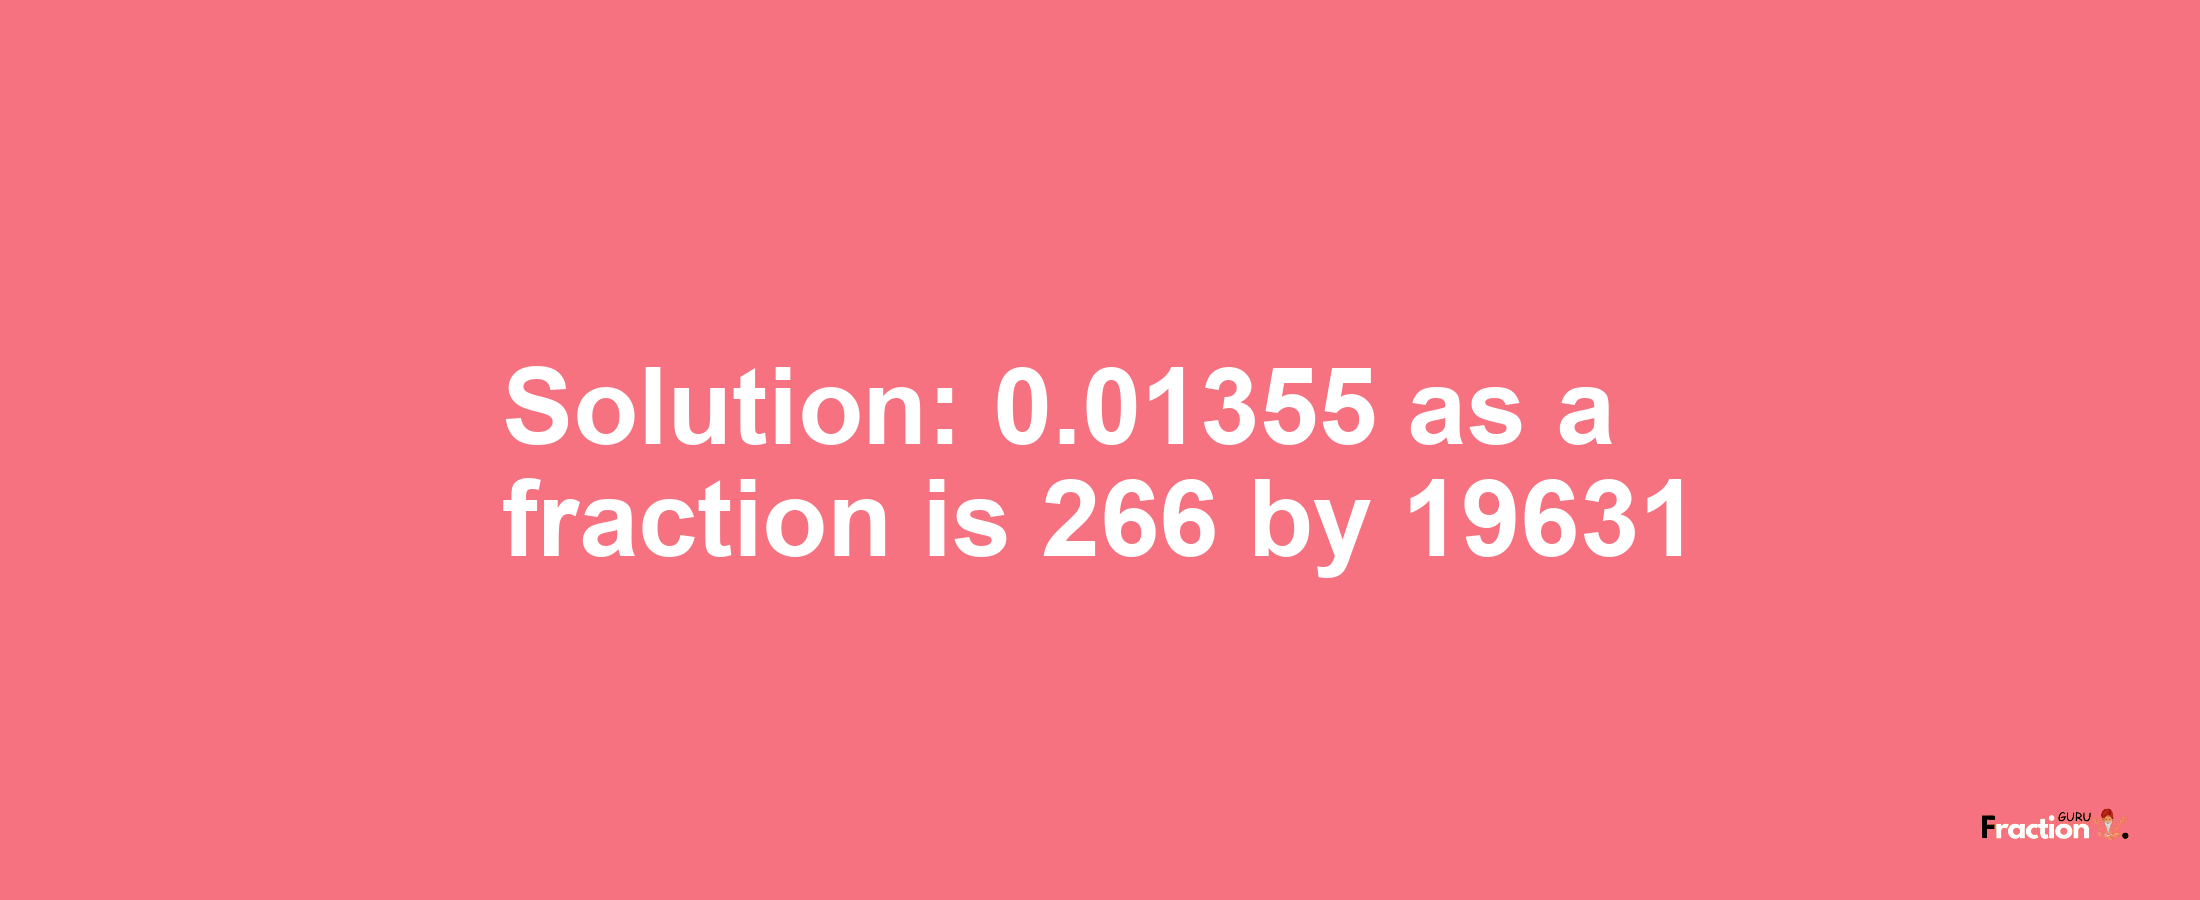 Solution:0.01355 as a fraction is 266/19631